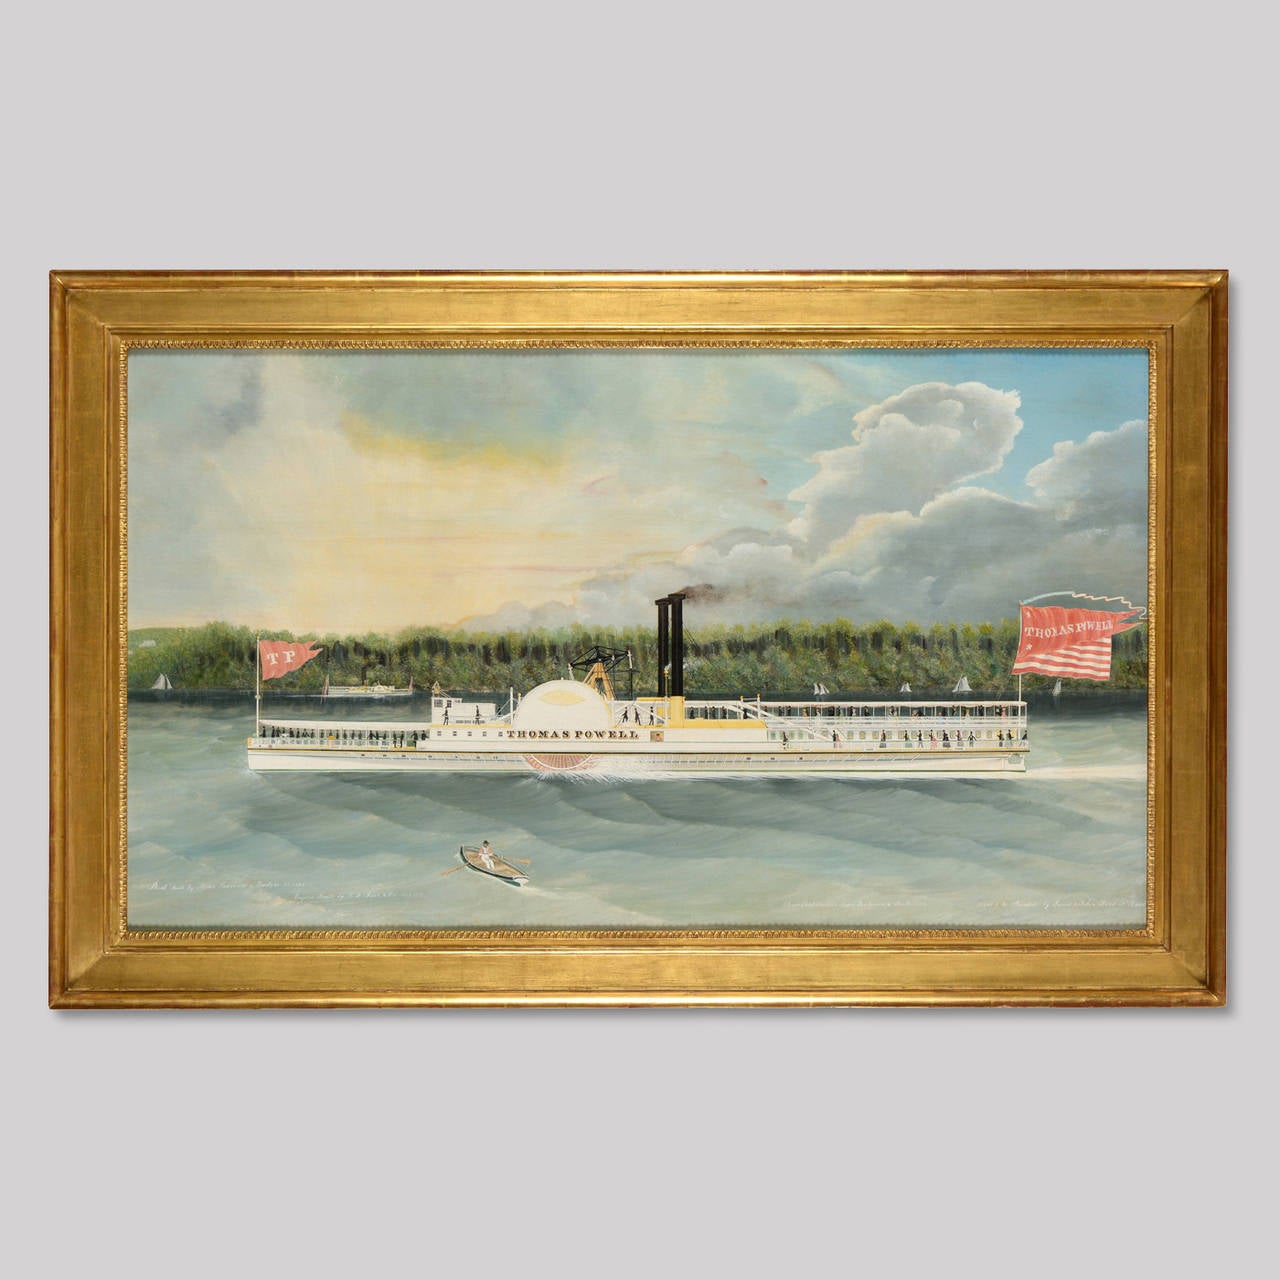 Paddlewheel Ship'Thomas Powell.'
Inscribed (l.r.): Drawn and painted by James & John Bard, New York / Messers Lawrence & Sneeden Builders, Engine T. F. Secor & Co. Steamboat painters Bootman & Smith.
Oil on canvas:
Measures: 31 ¼